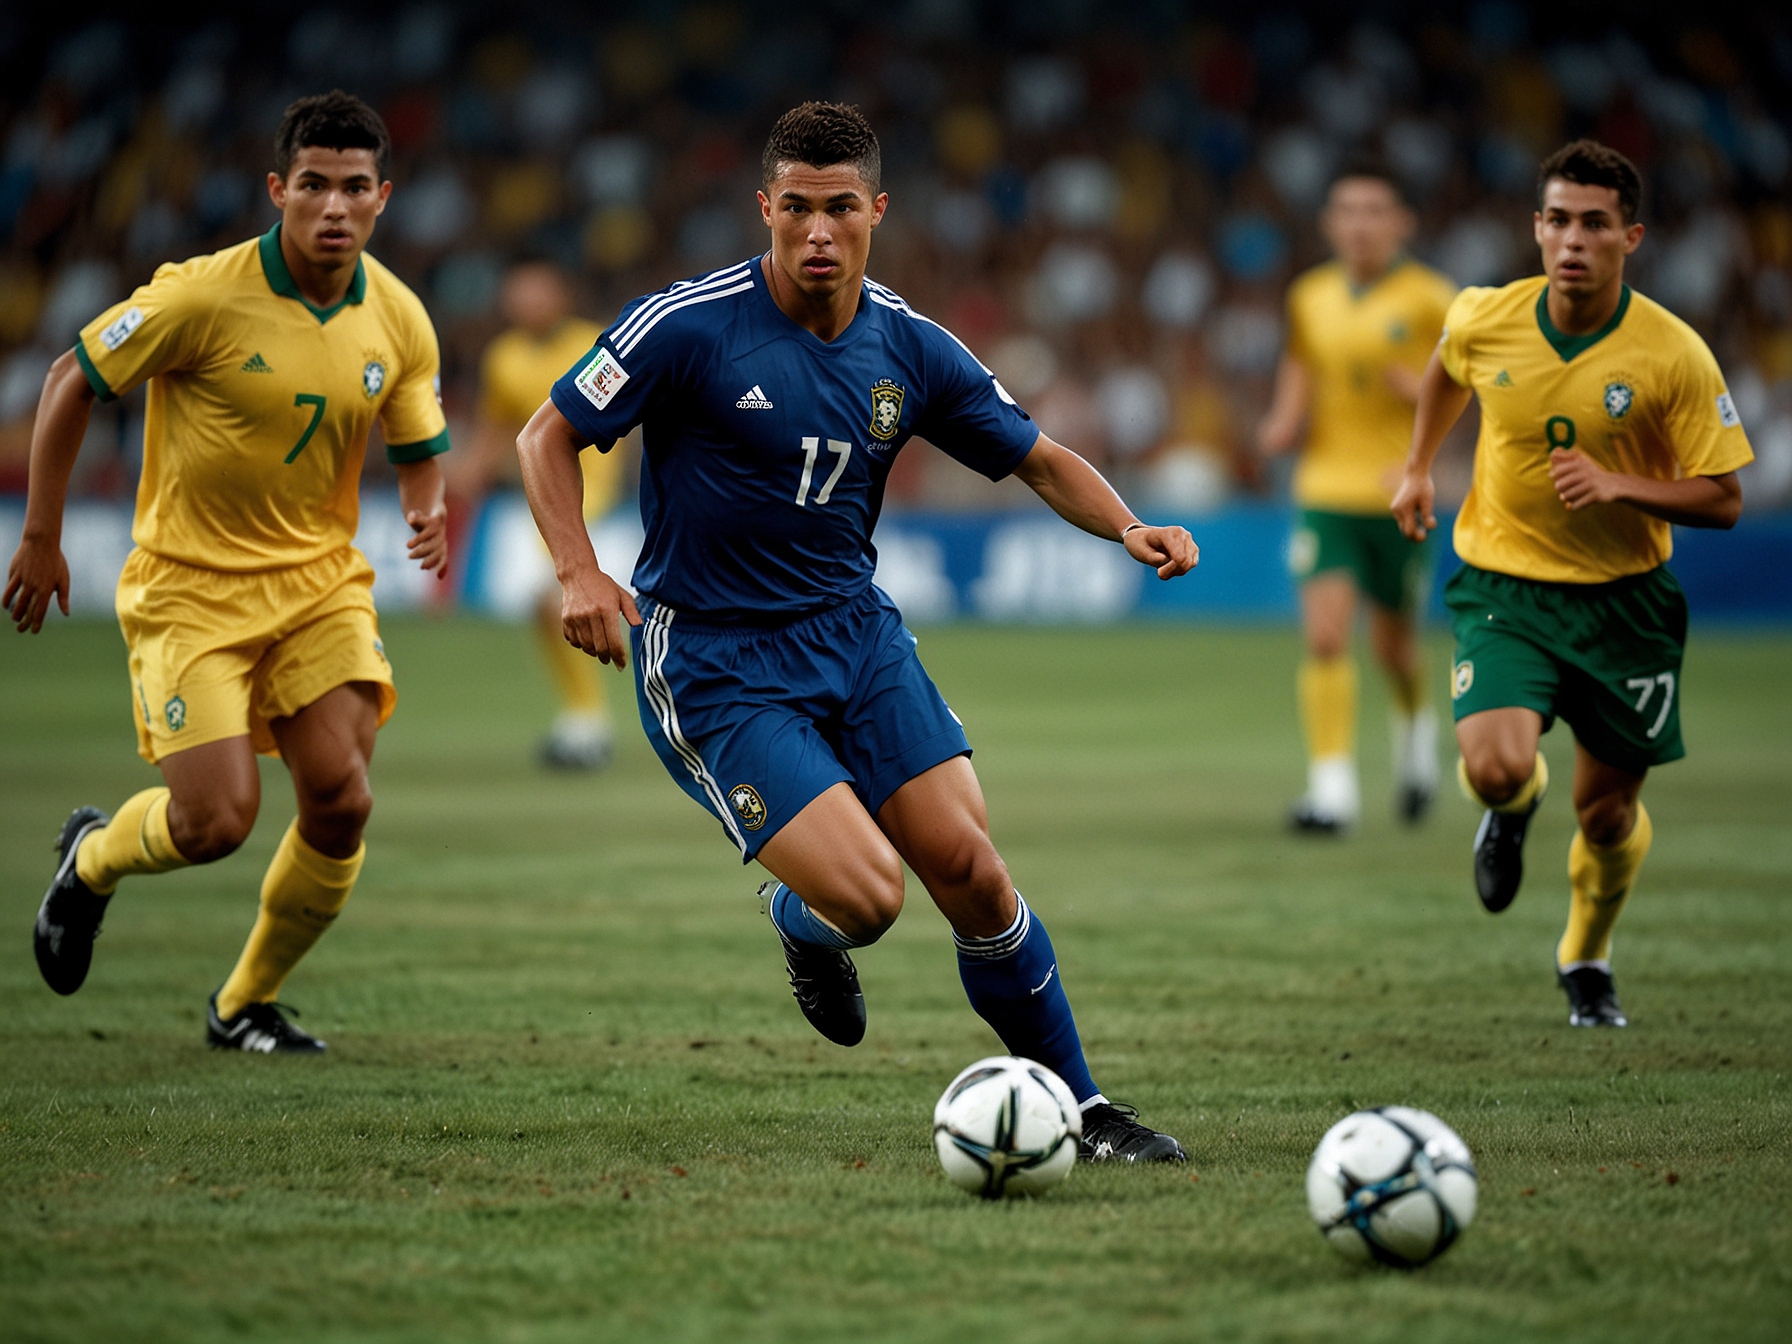 Ronaldo, the tournament's top scorer, dribbling past defenders during the 2002 World Cup. His exceptional performance, speed, and precision were pivotal in Brazil's championship-winning run.